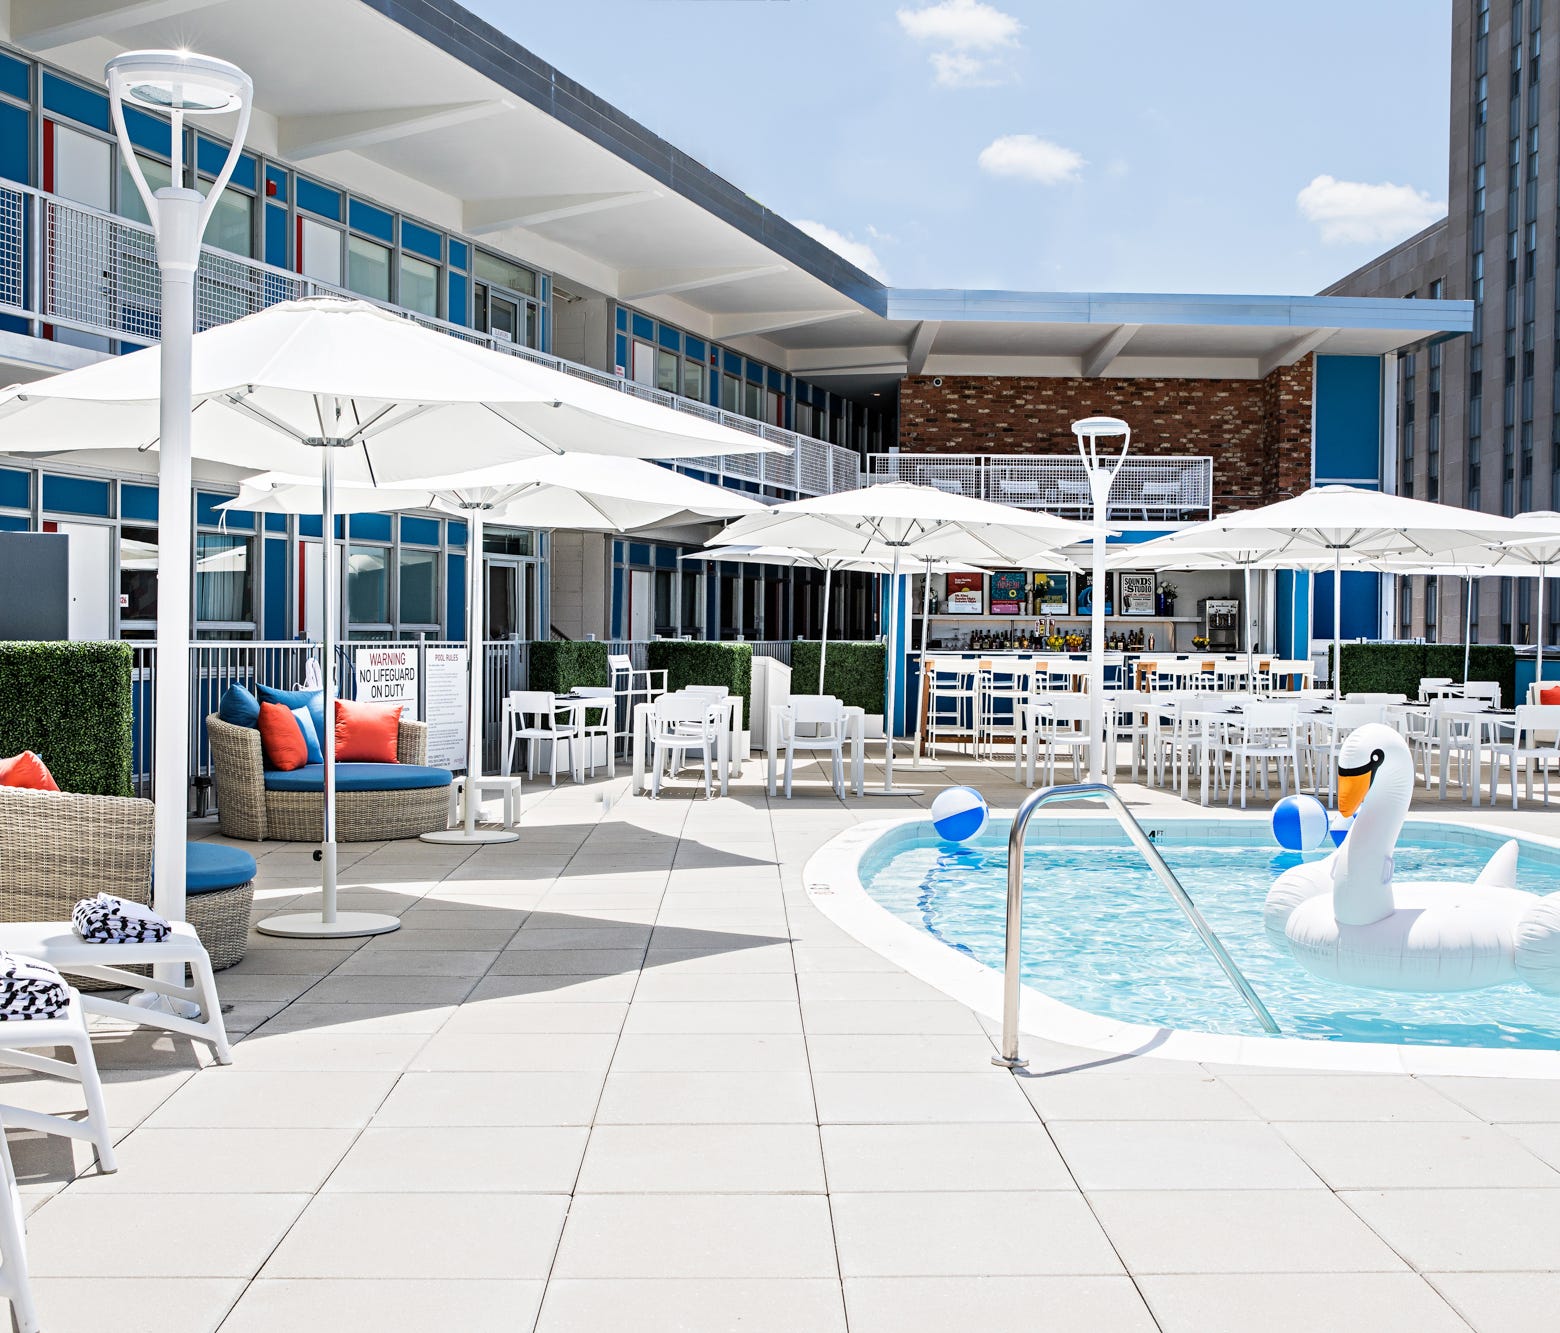 The new Unscripted Hotel in Durham, N.C., has a pool.